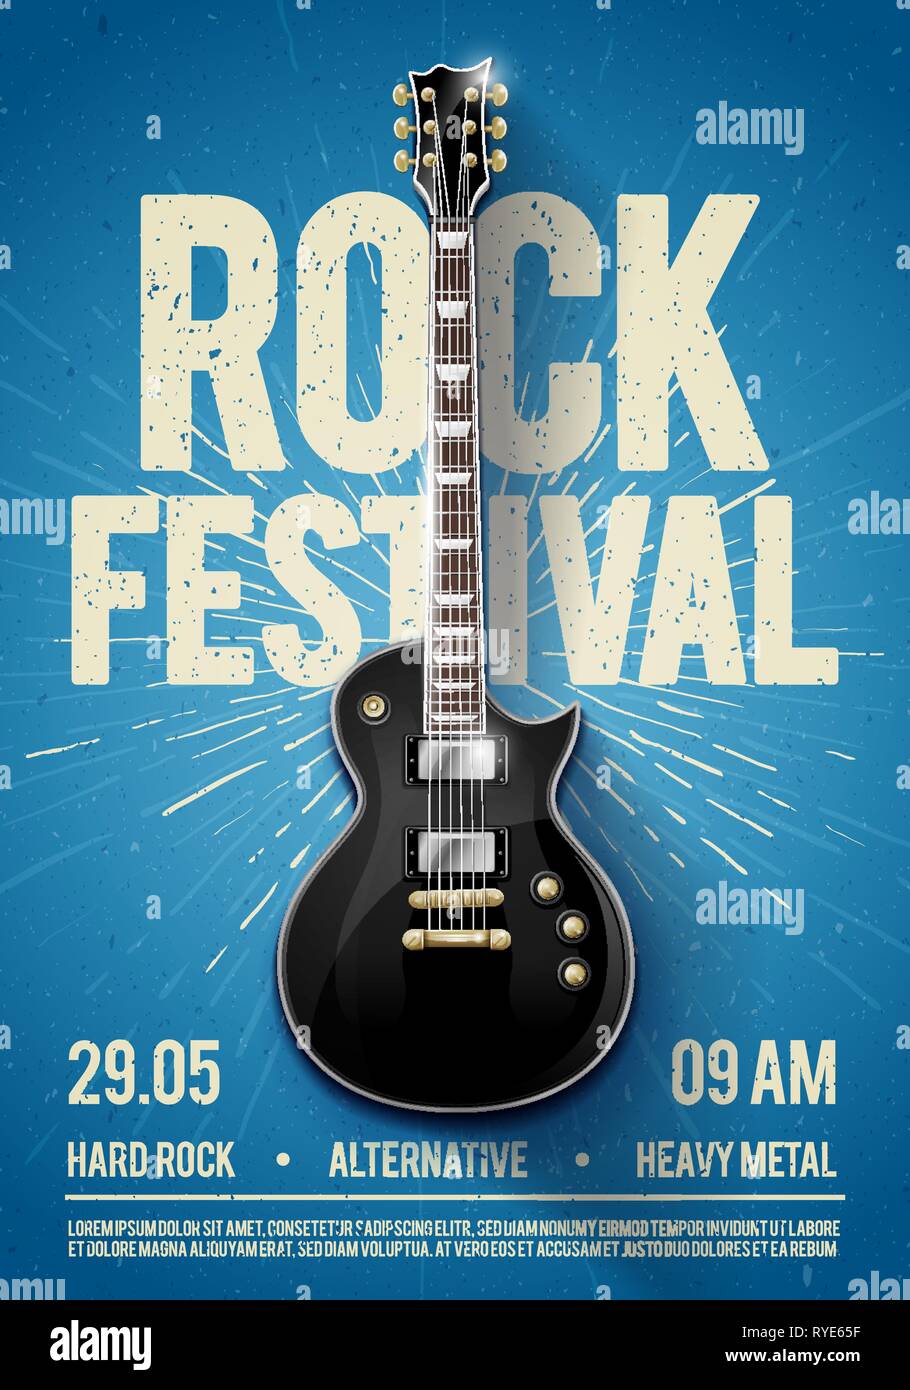 Rock music festival concert poster Royalty Free Vector Image